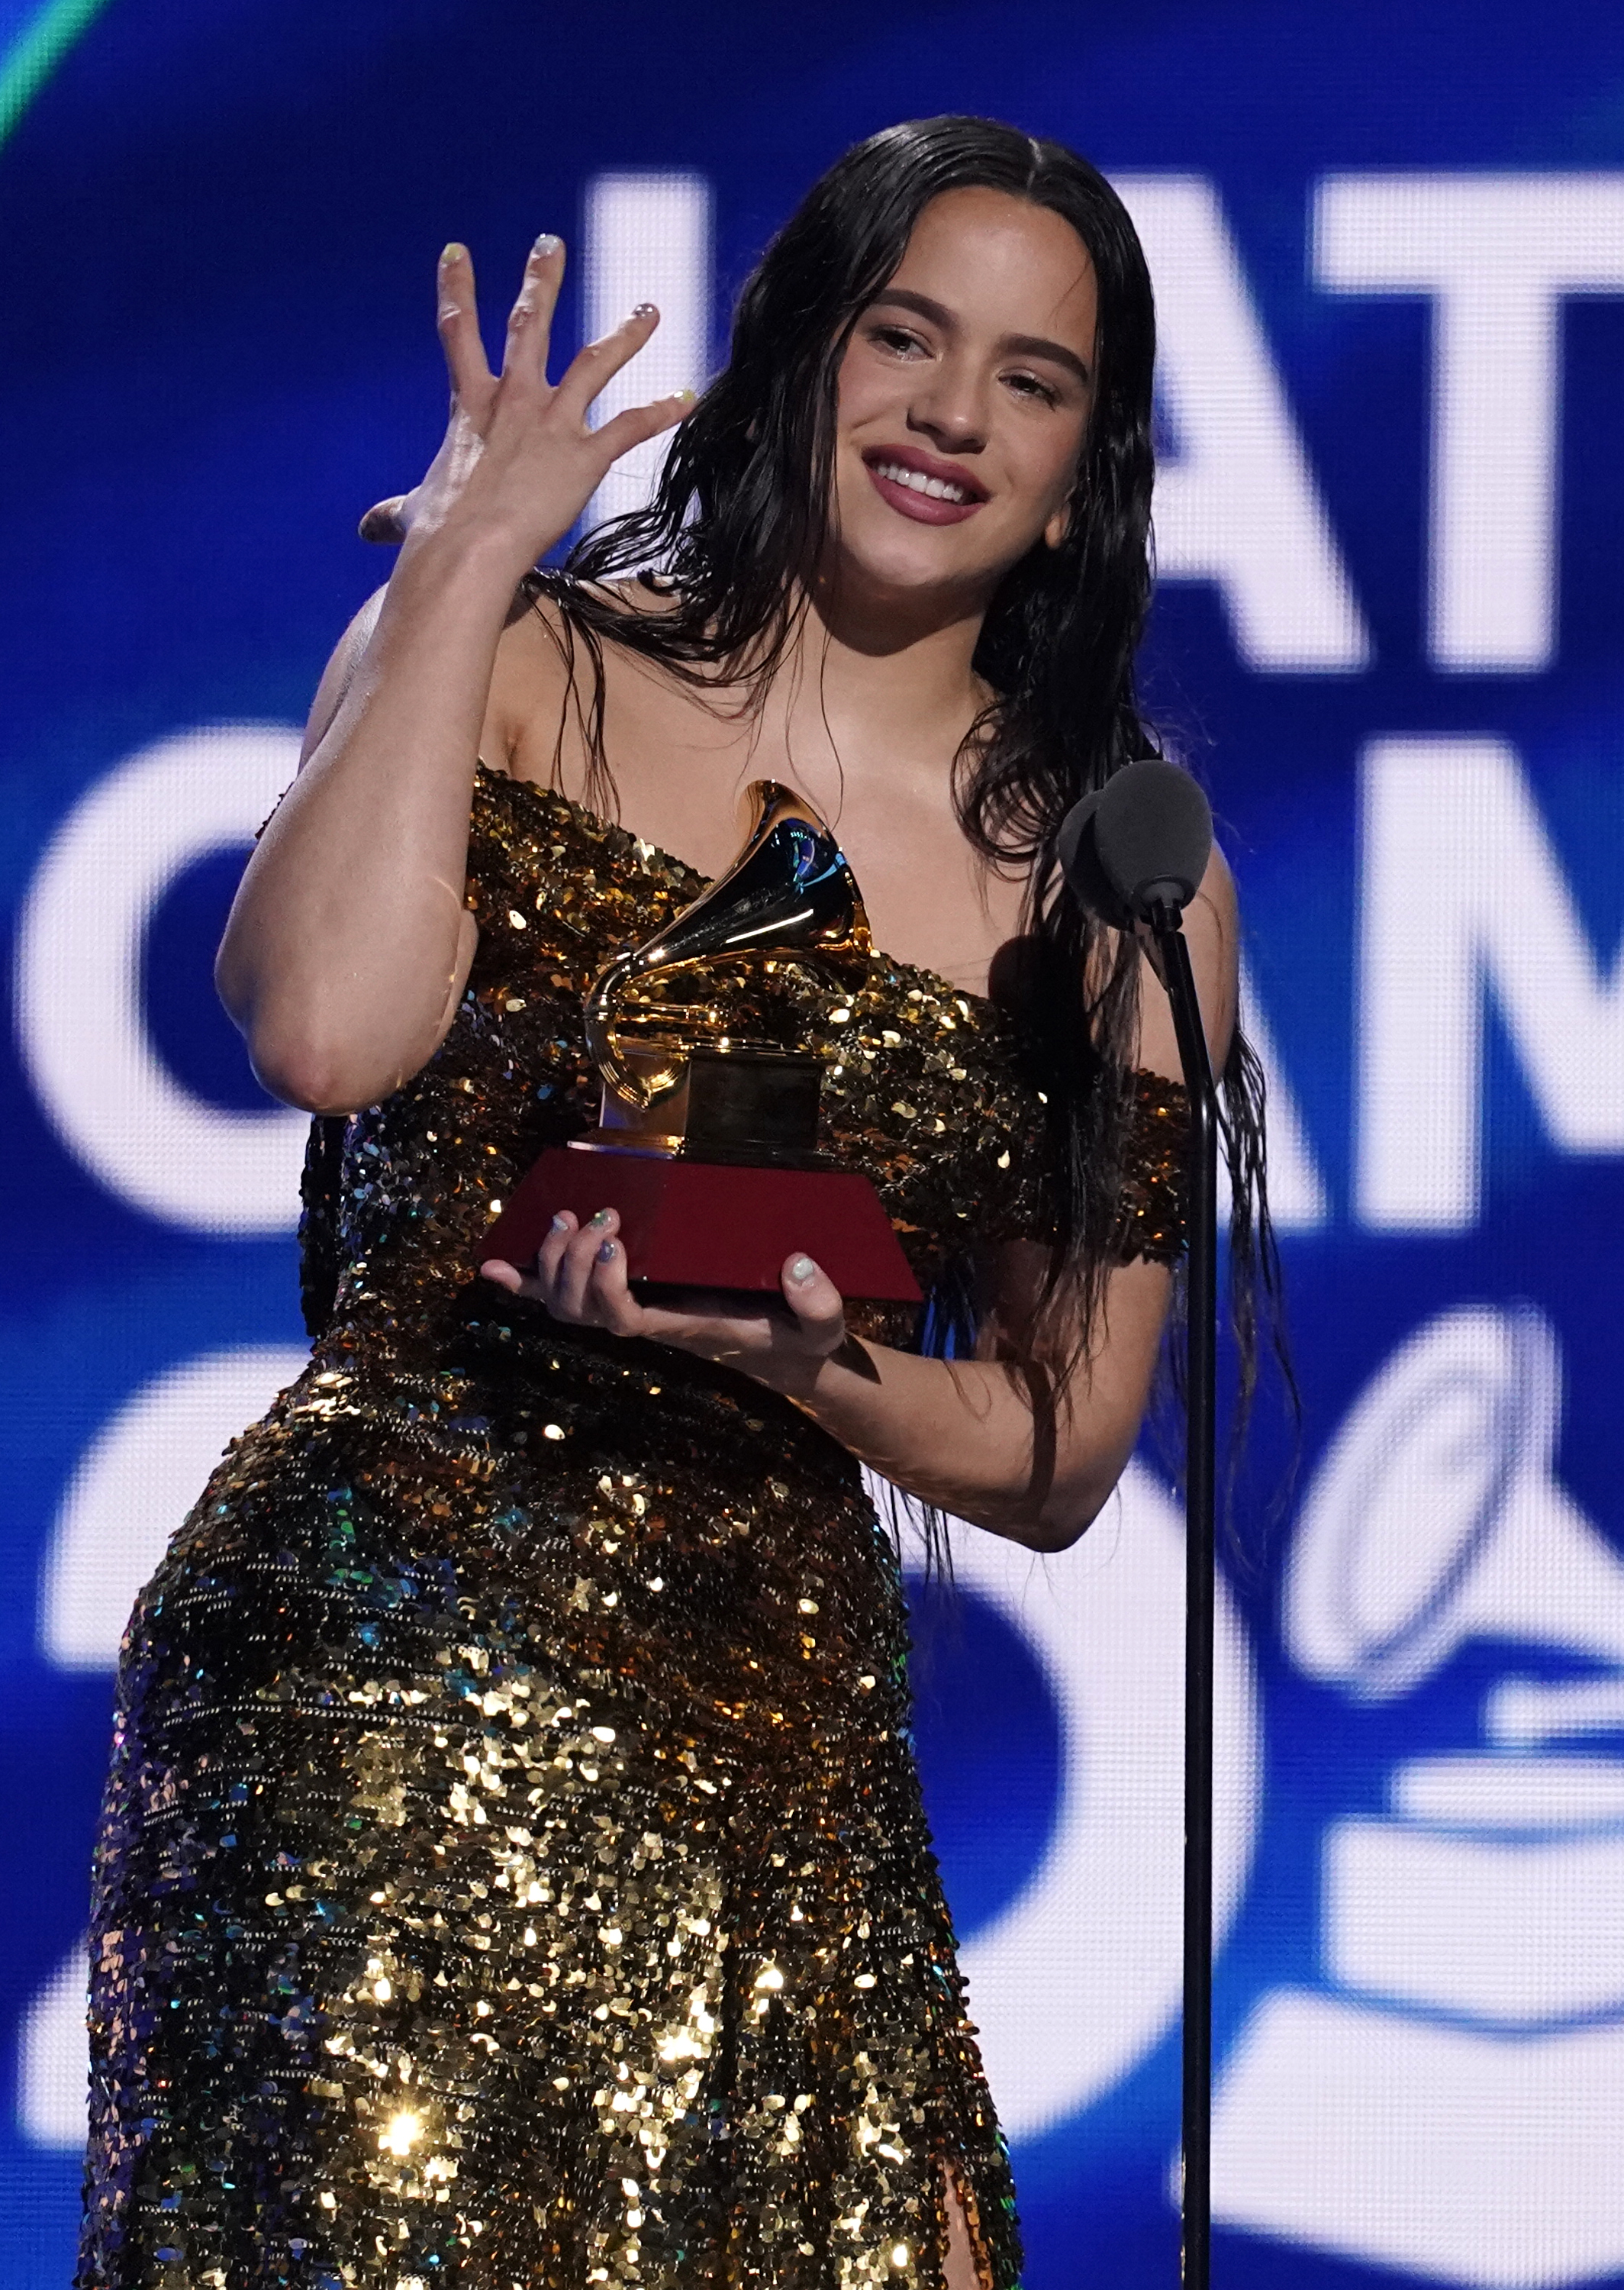 Rosalía Performs “Hentai” and “La Fama” at the 2022 Latin Grammys